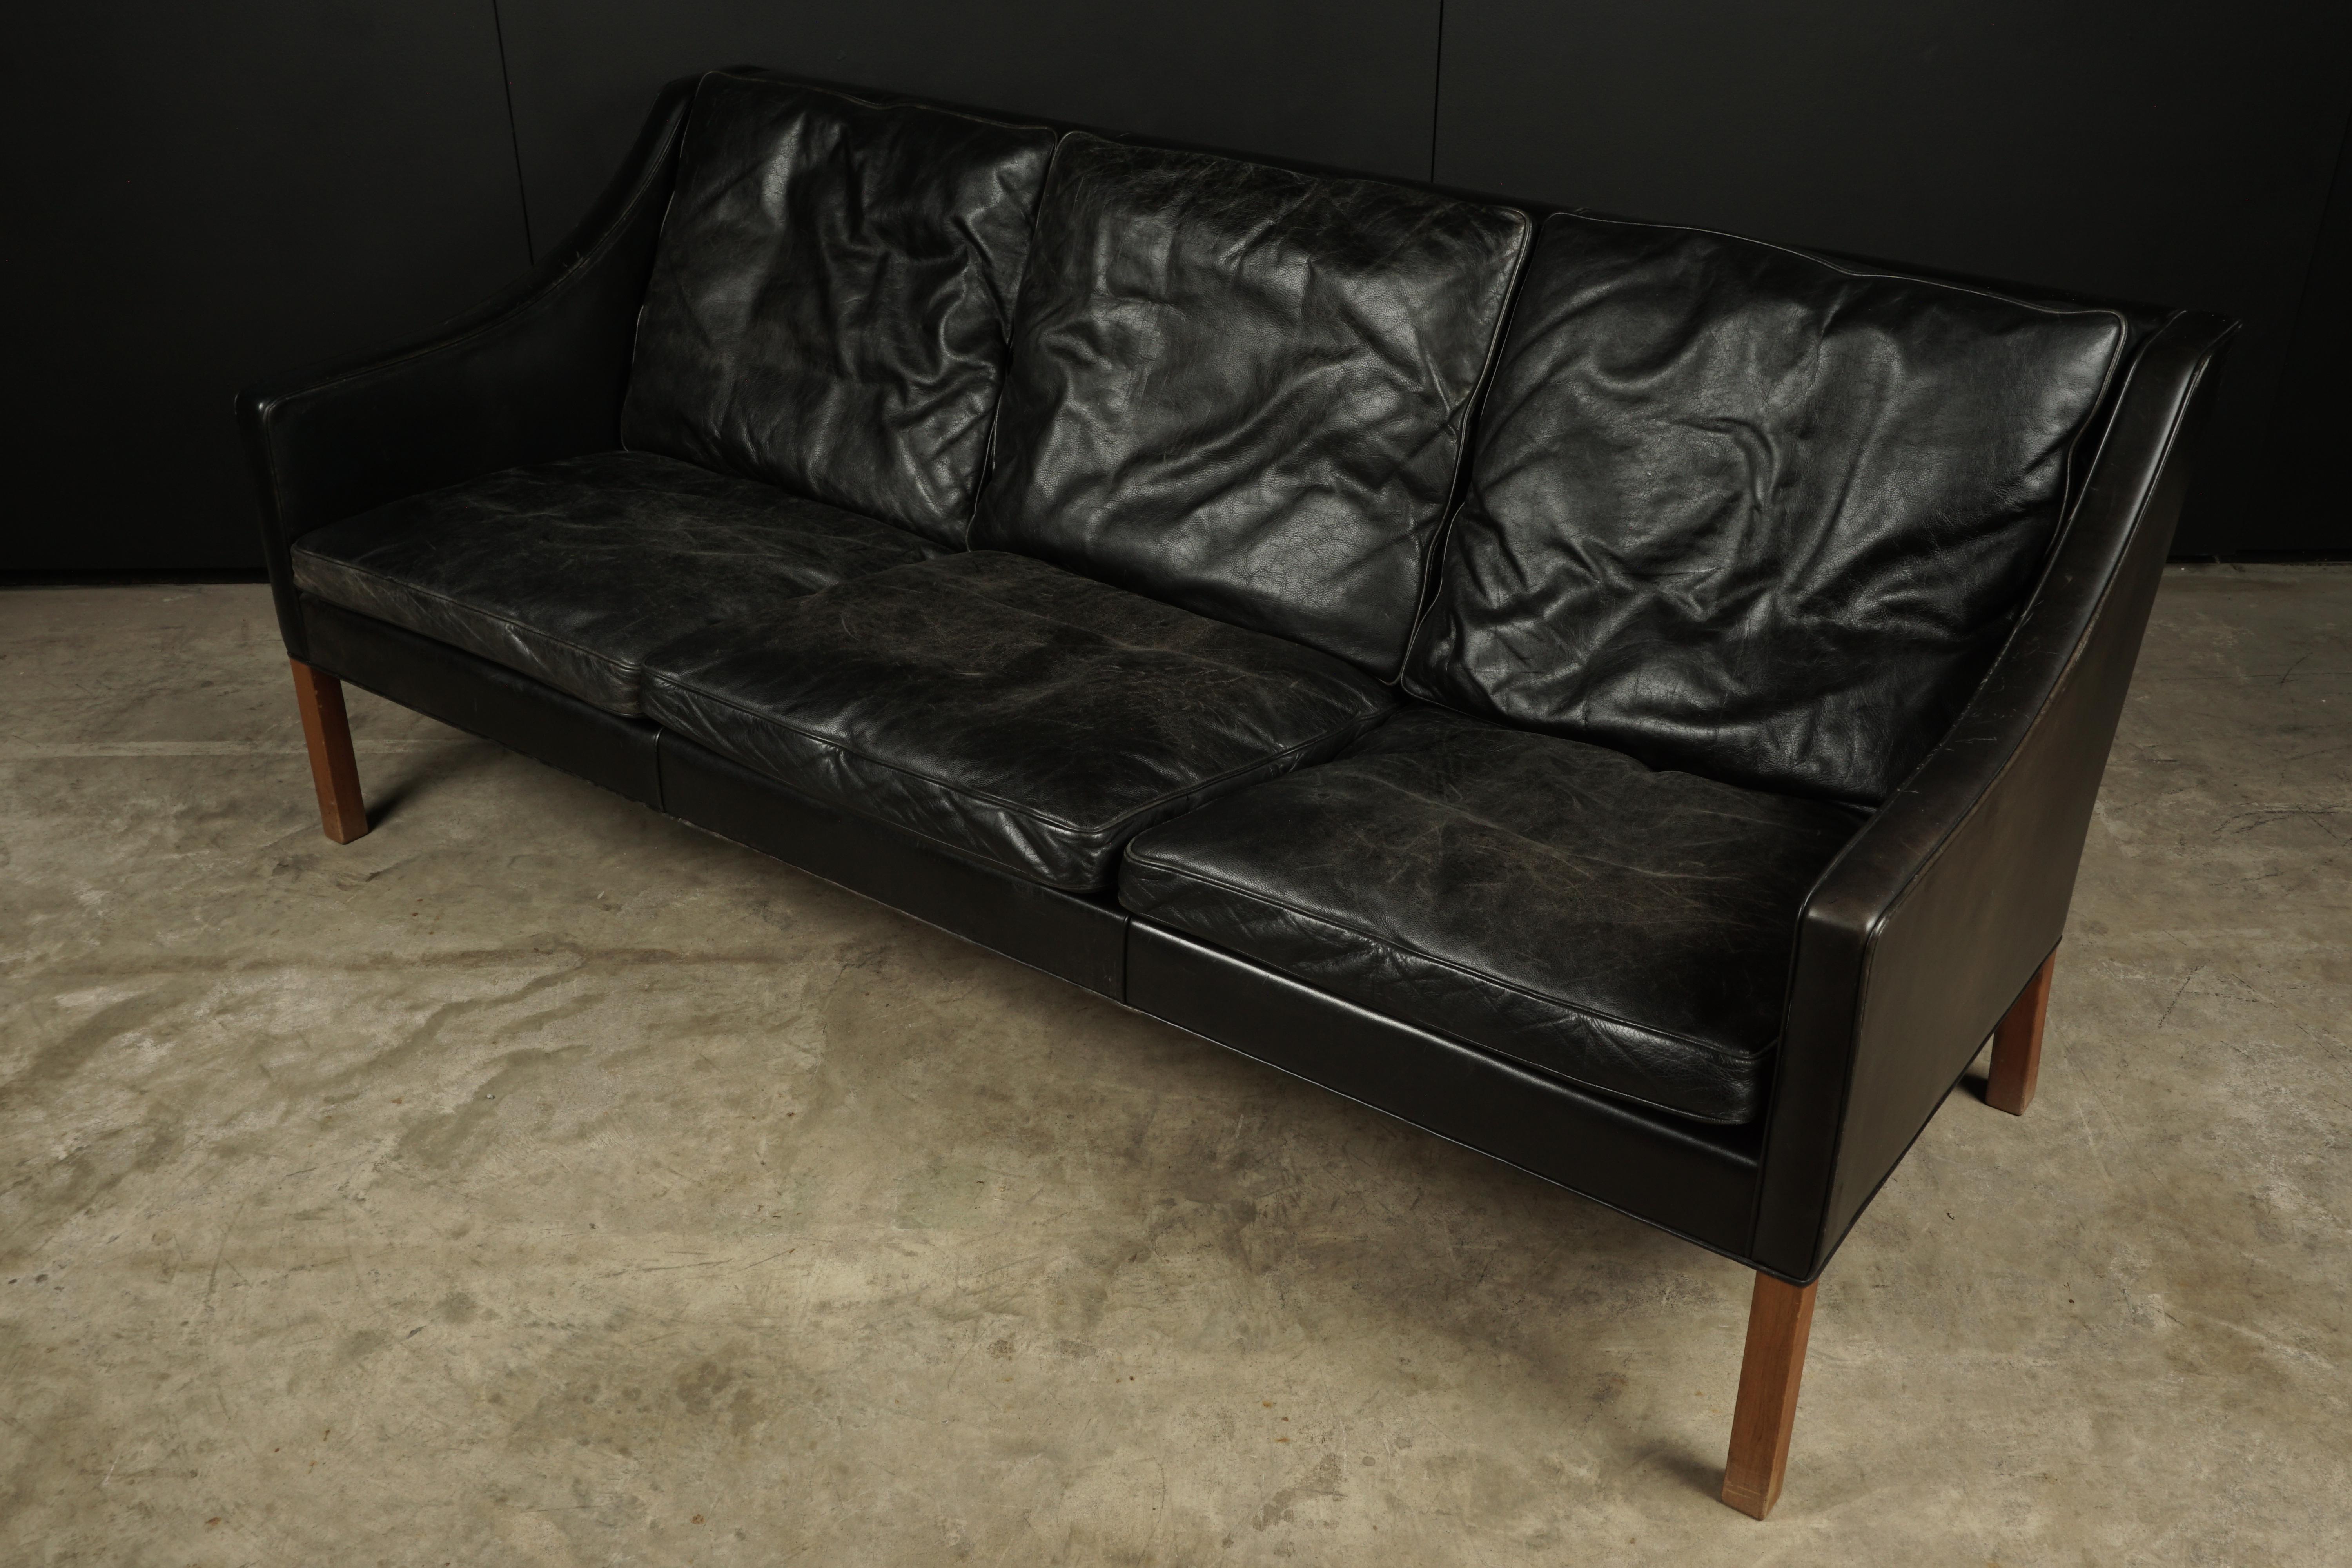 Three-seat sofa designed by Borge Mogensen, Model 2209. Original black leather upholstery with nice wear and patina.